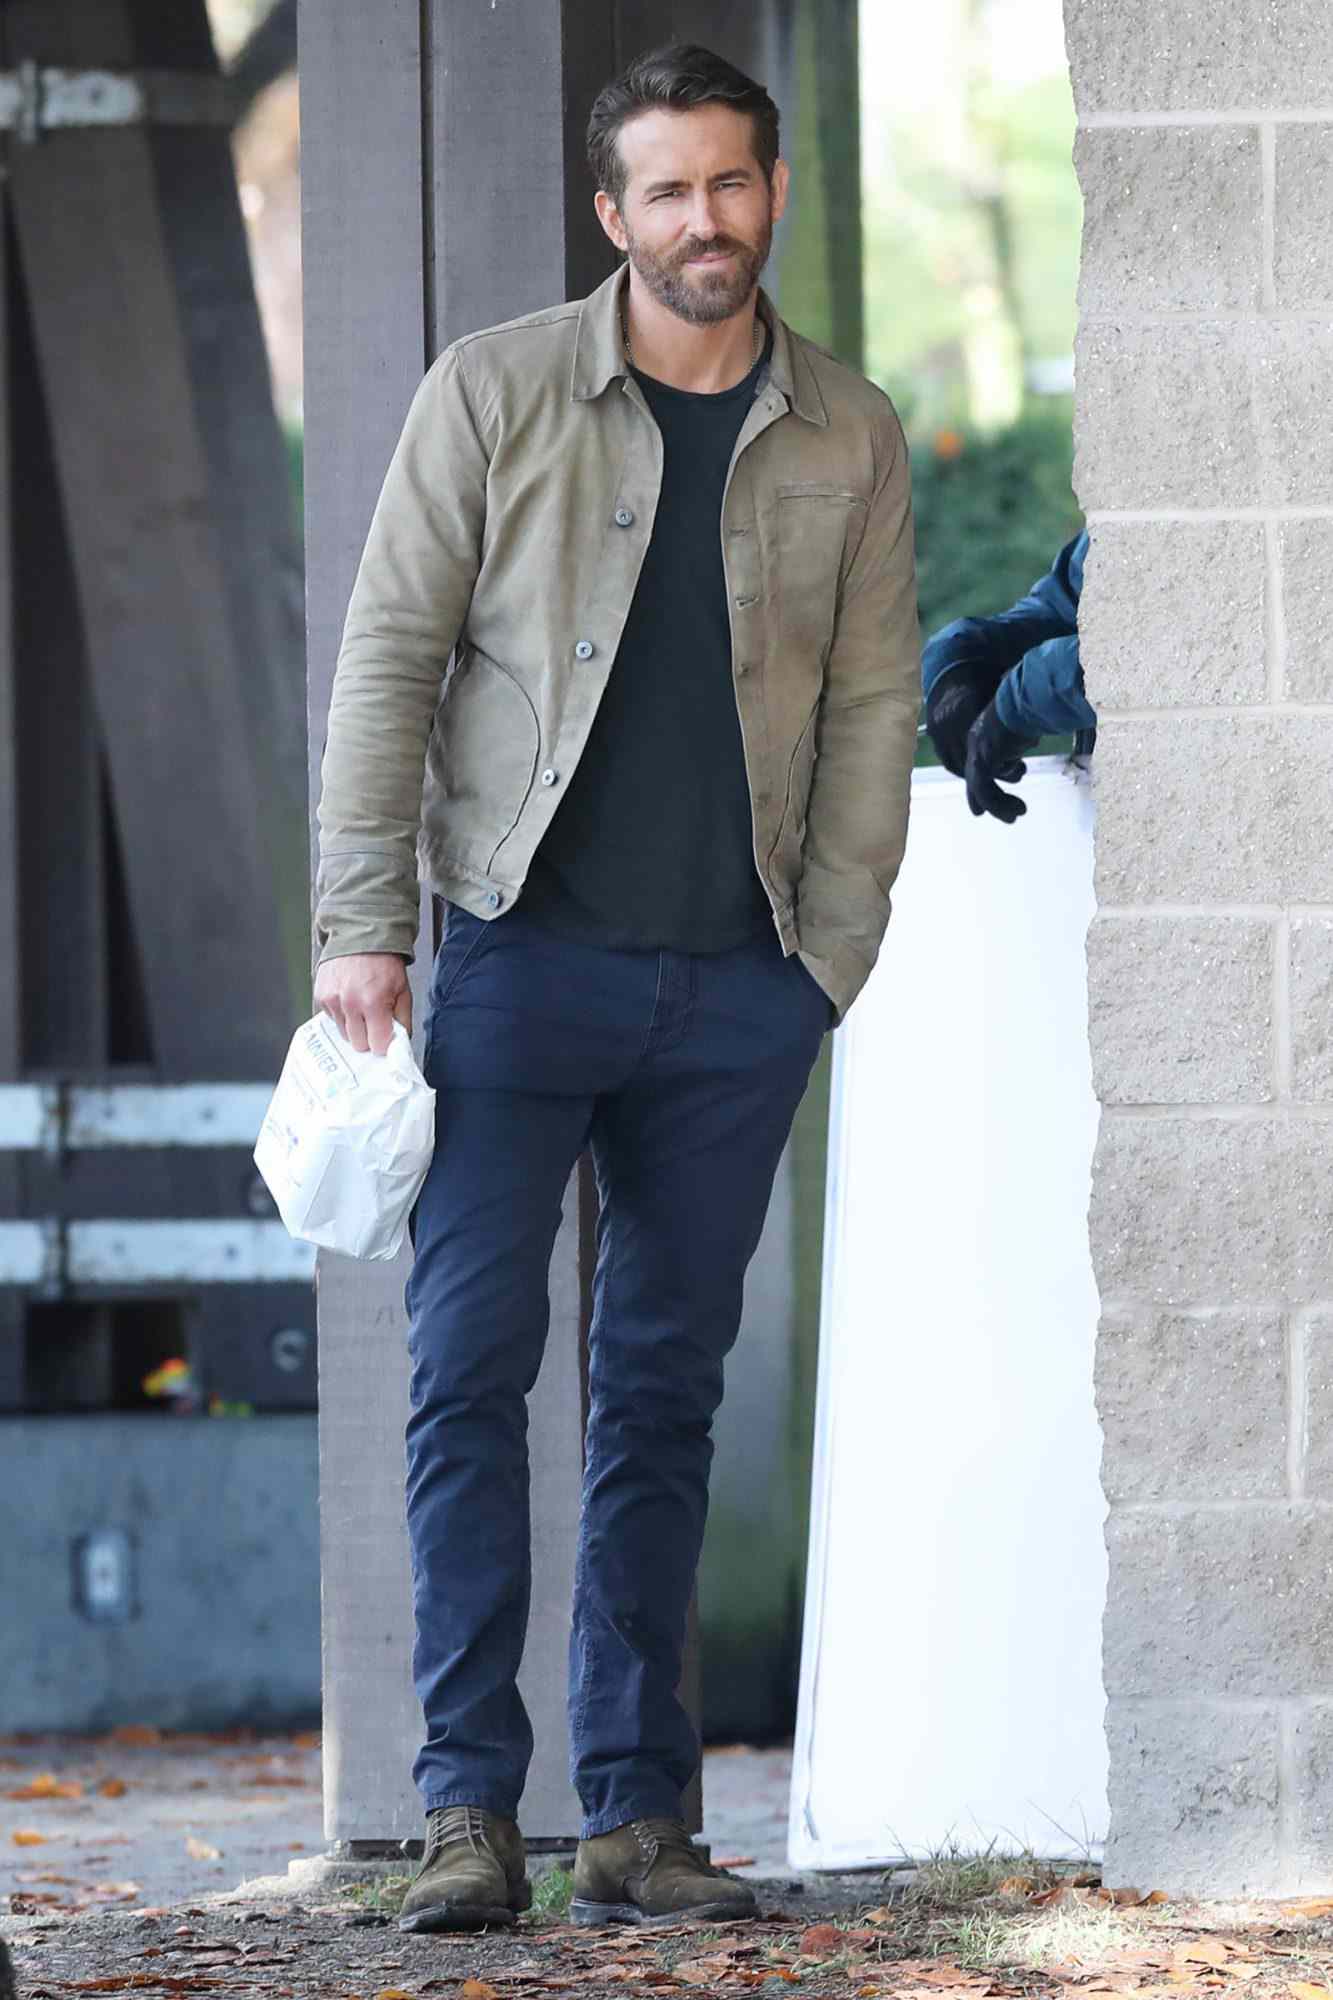 Ryan Reynolds is Spotted on the Set of His New Netflix Film, 'The Adam Project' in Vancouver, Canada.